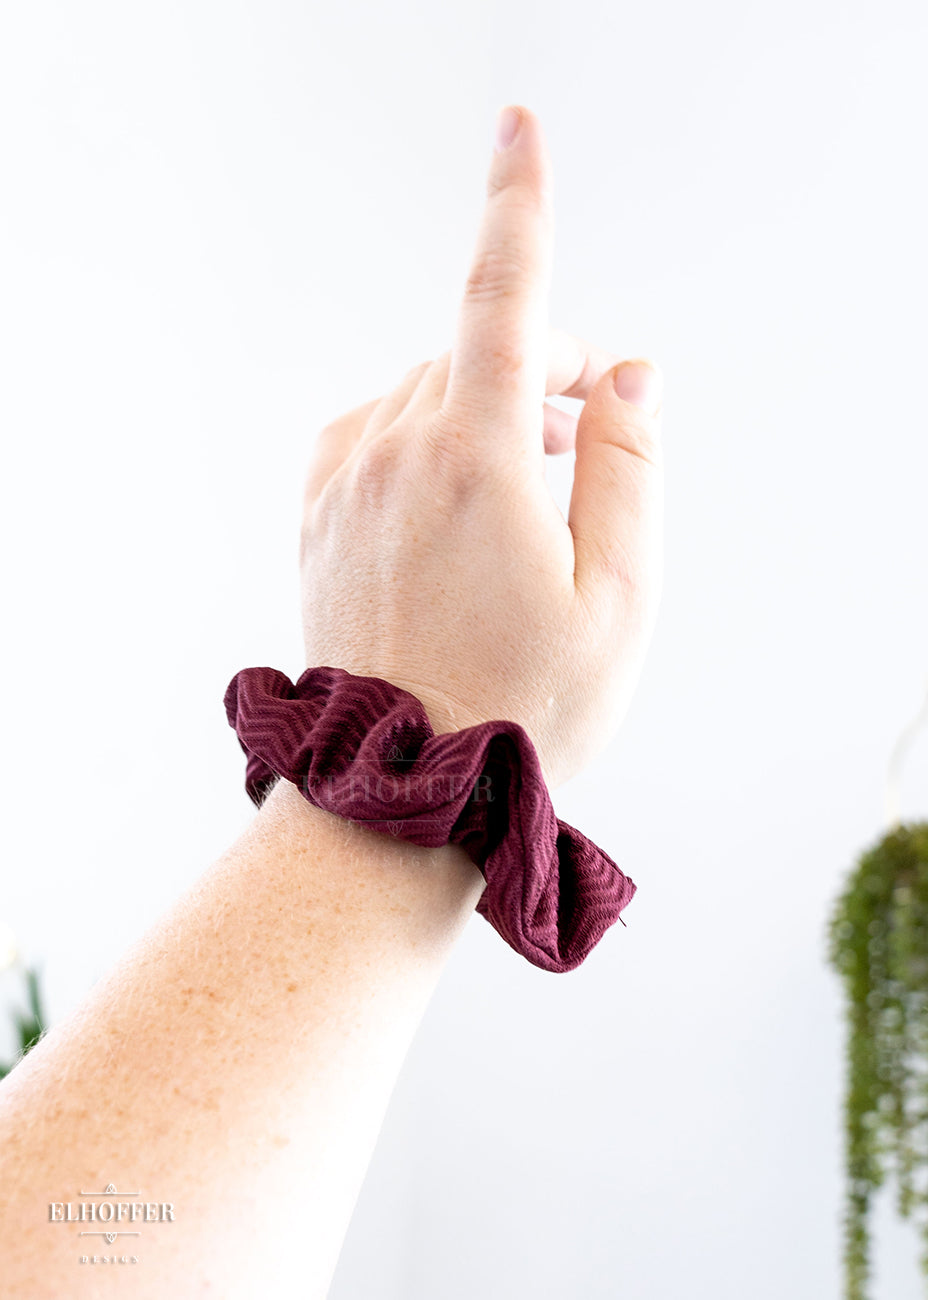 A fair and freckled arm wearing a chaos print scrunchie. The Chaos Red fabric is a narrow chevron textured spandex knit in a dark red shade of burgundy.